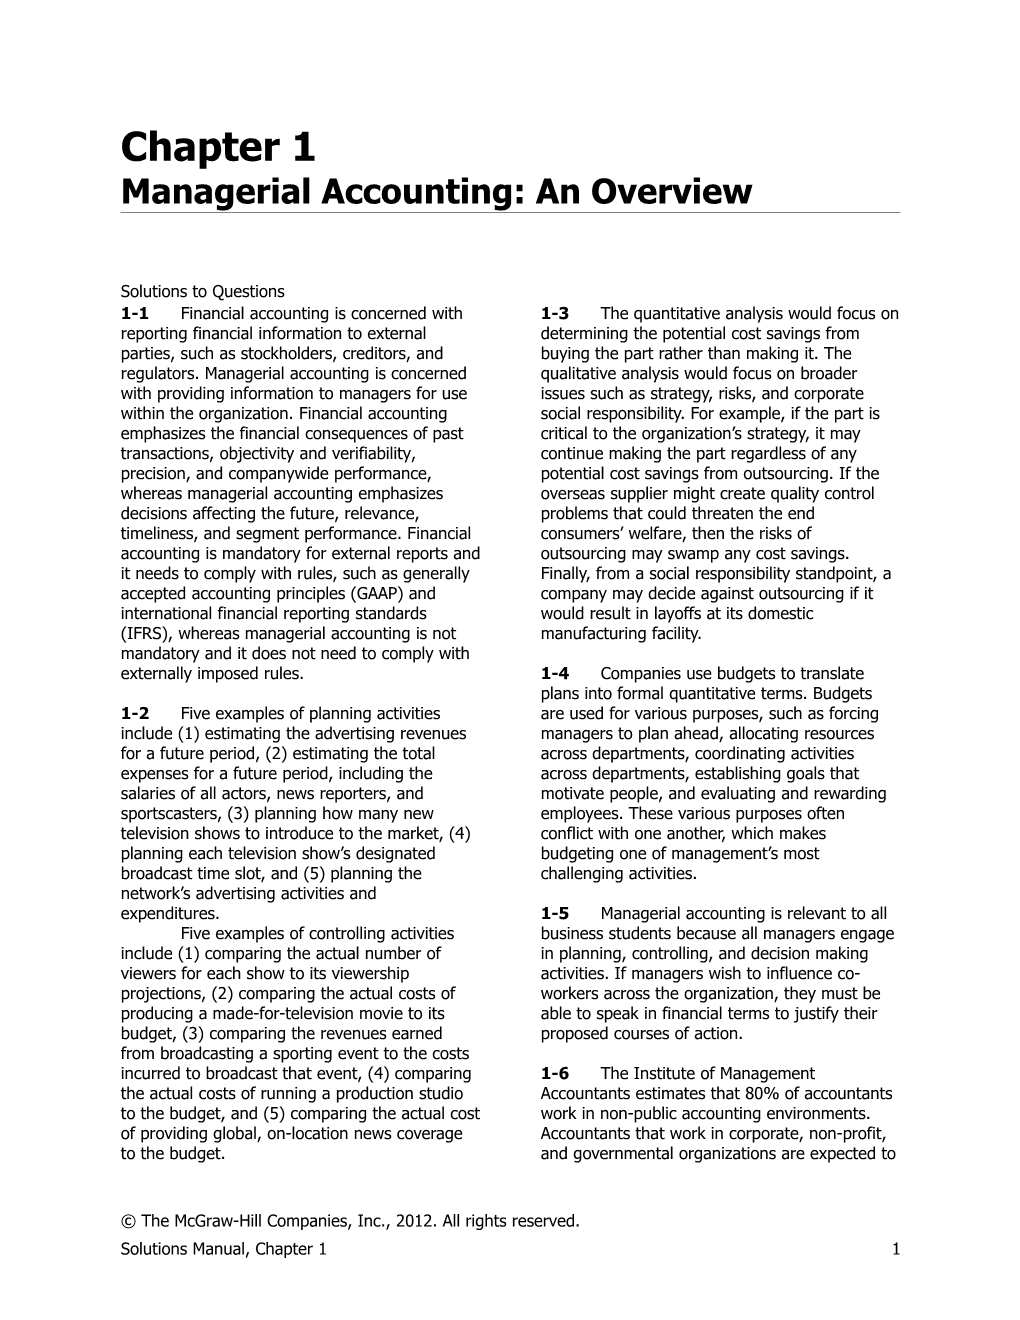 Managerial Accounting: an Overview